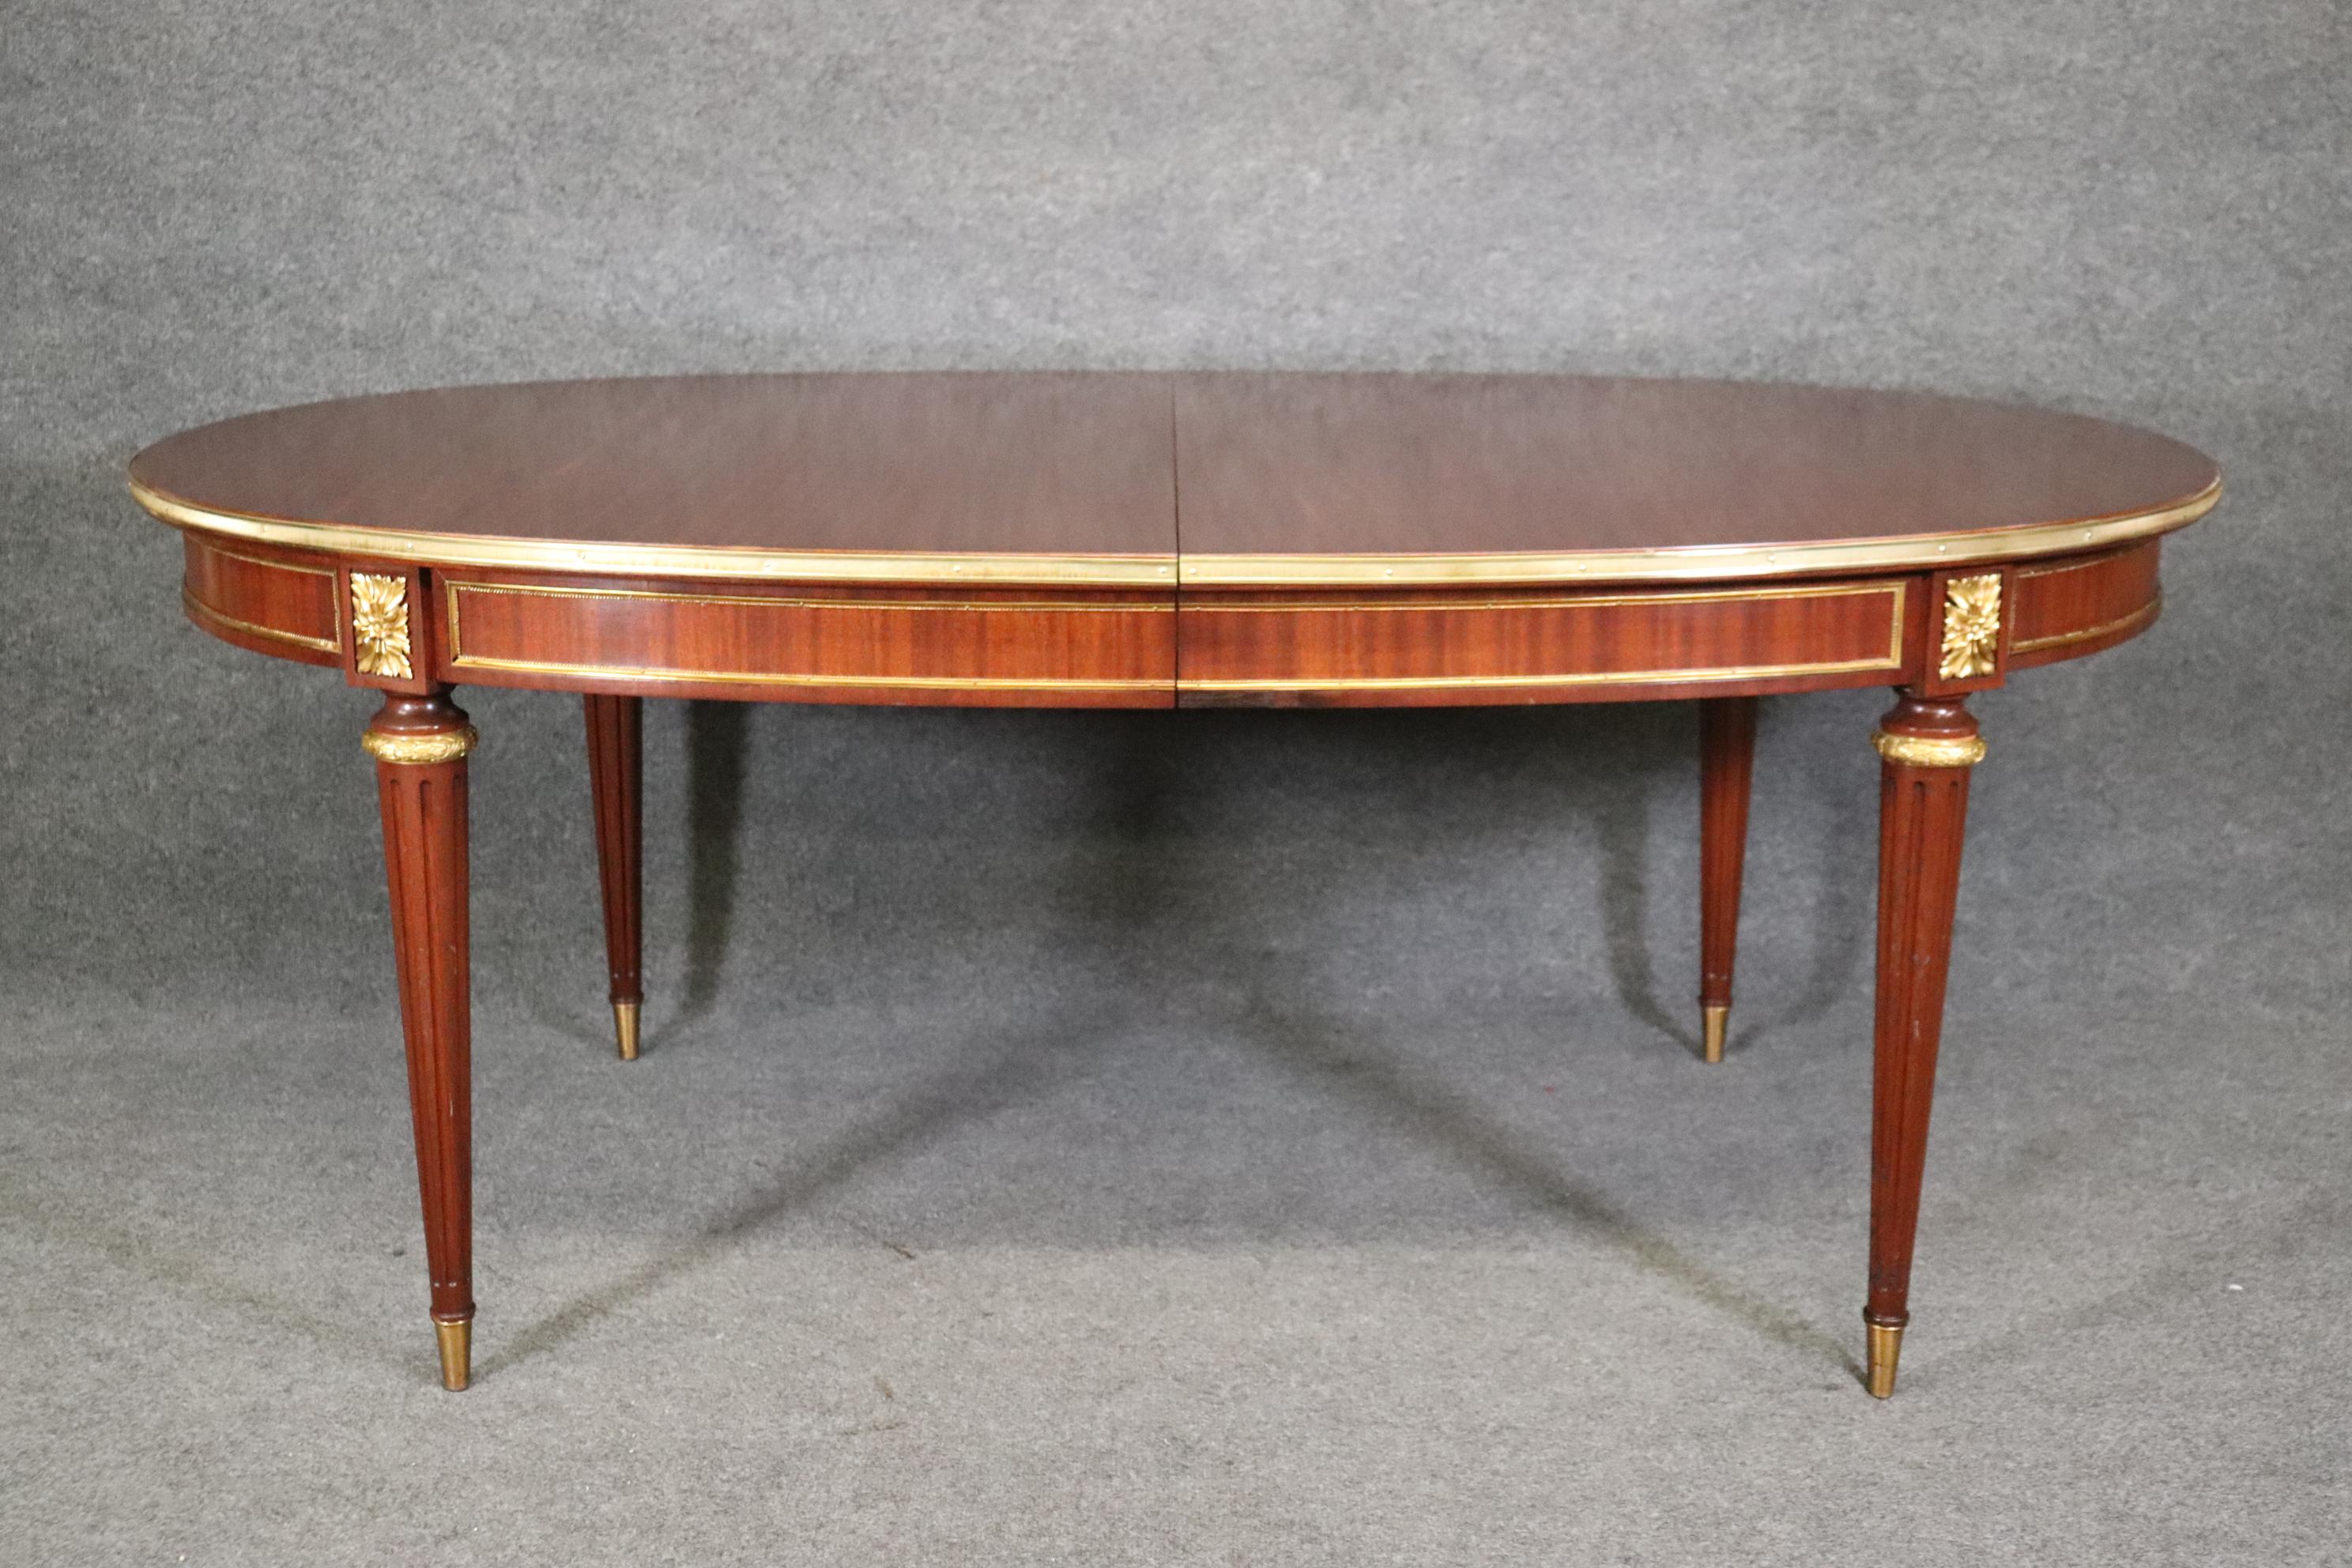 Polished Maison Jansen Louis XVI Style Mahogany Dining Table With Two Leaves  For Sale